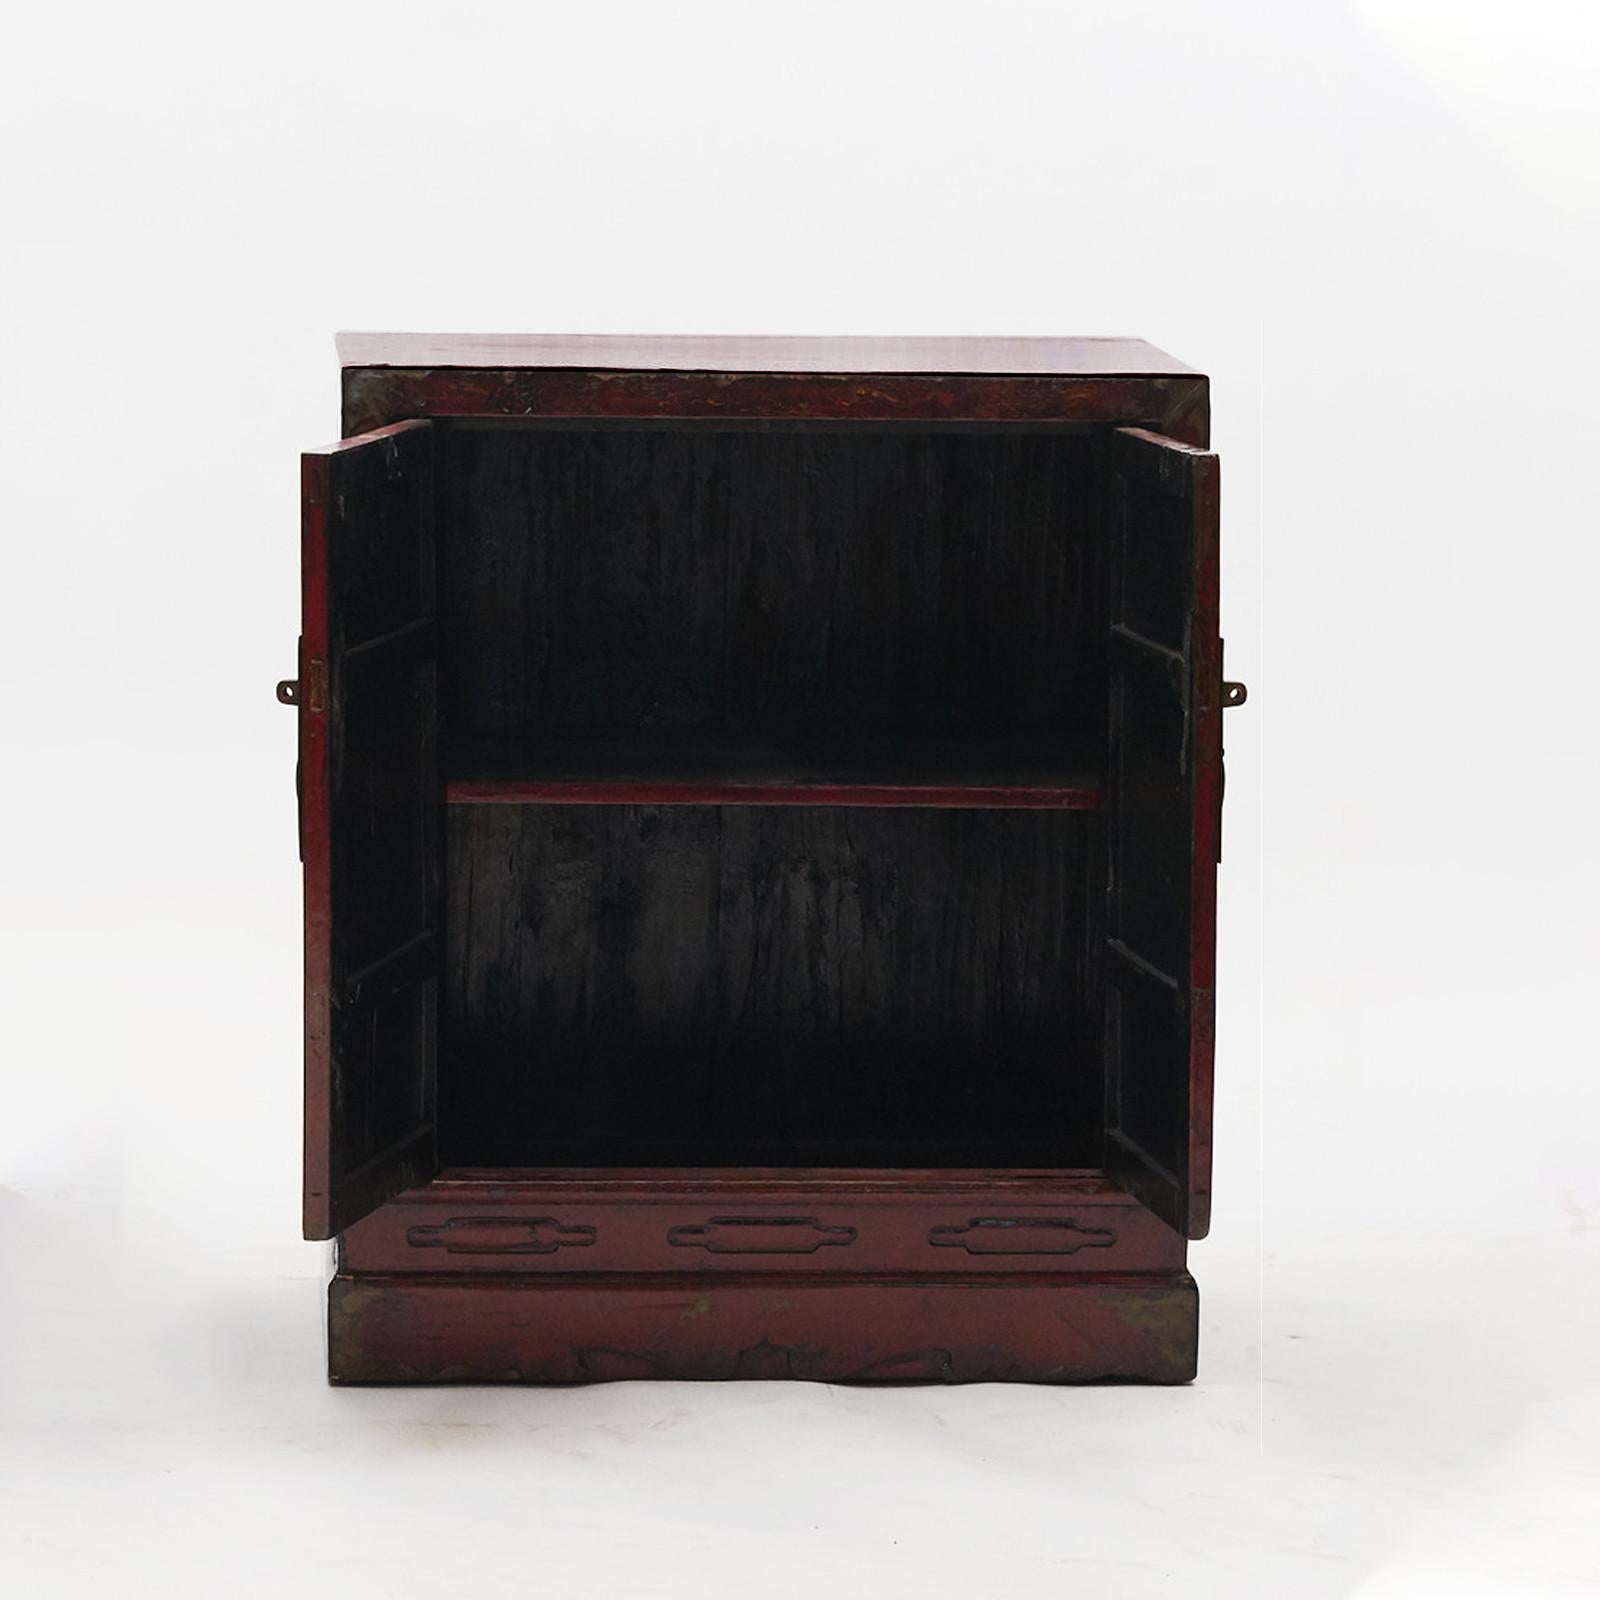 Cabinet with original red lacquer on front, original black lacquer on sides and top. Beautiful, natural patina. From Jiangsu province, China, 1800-1830.